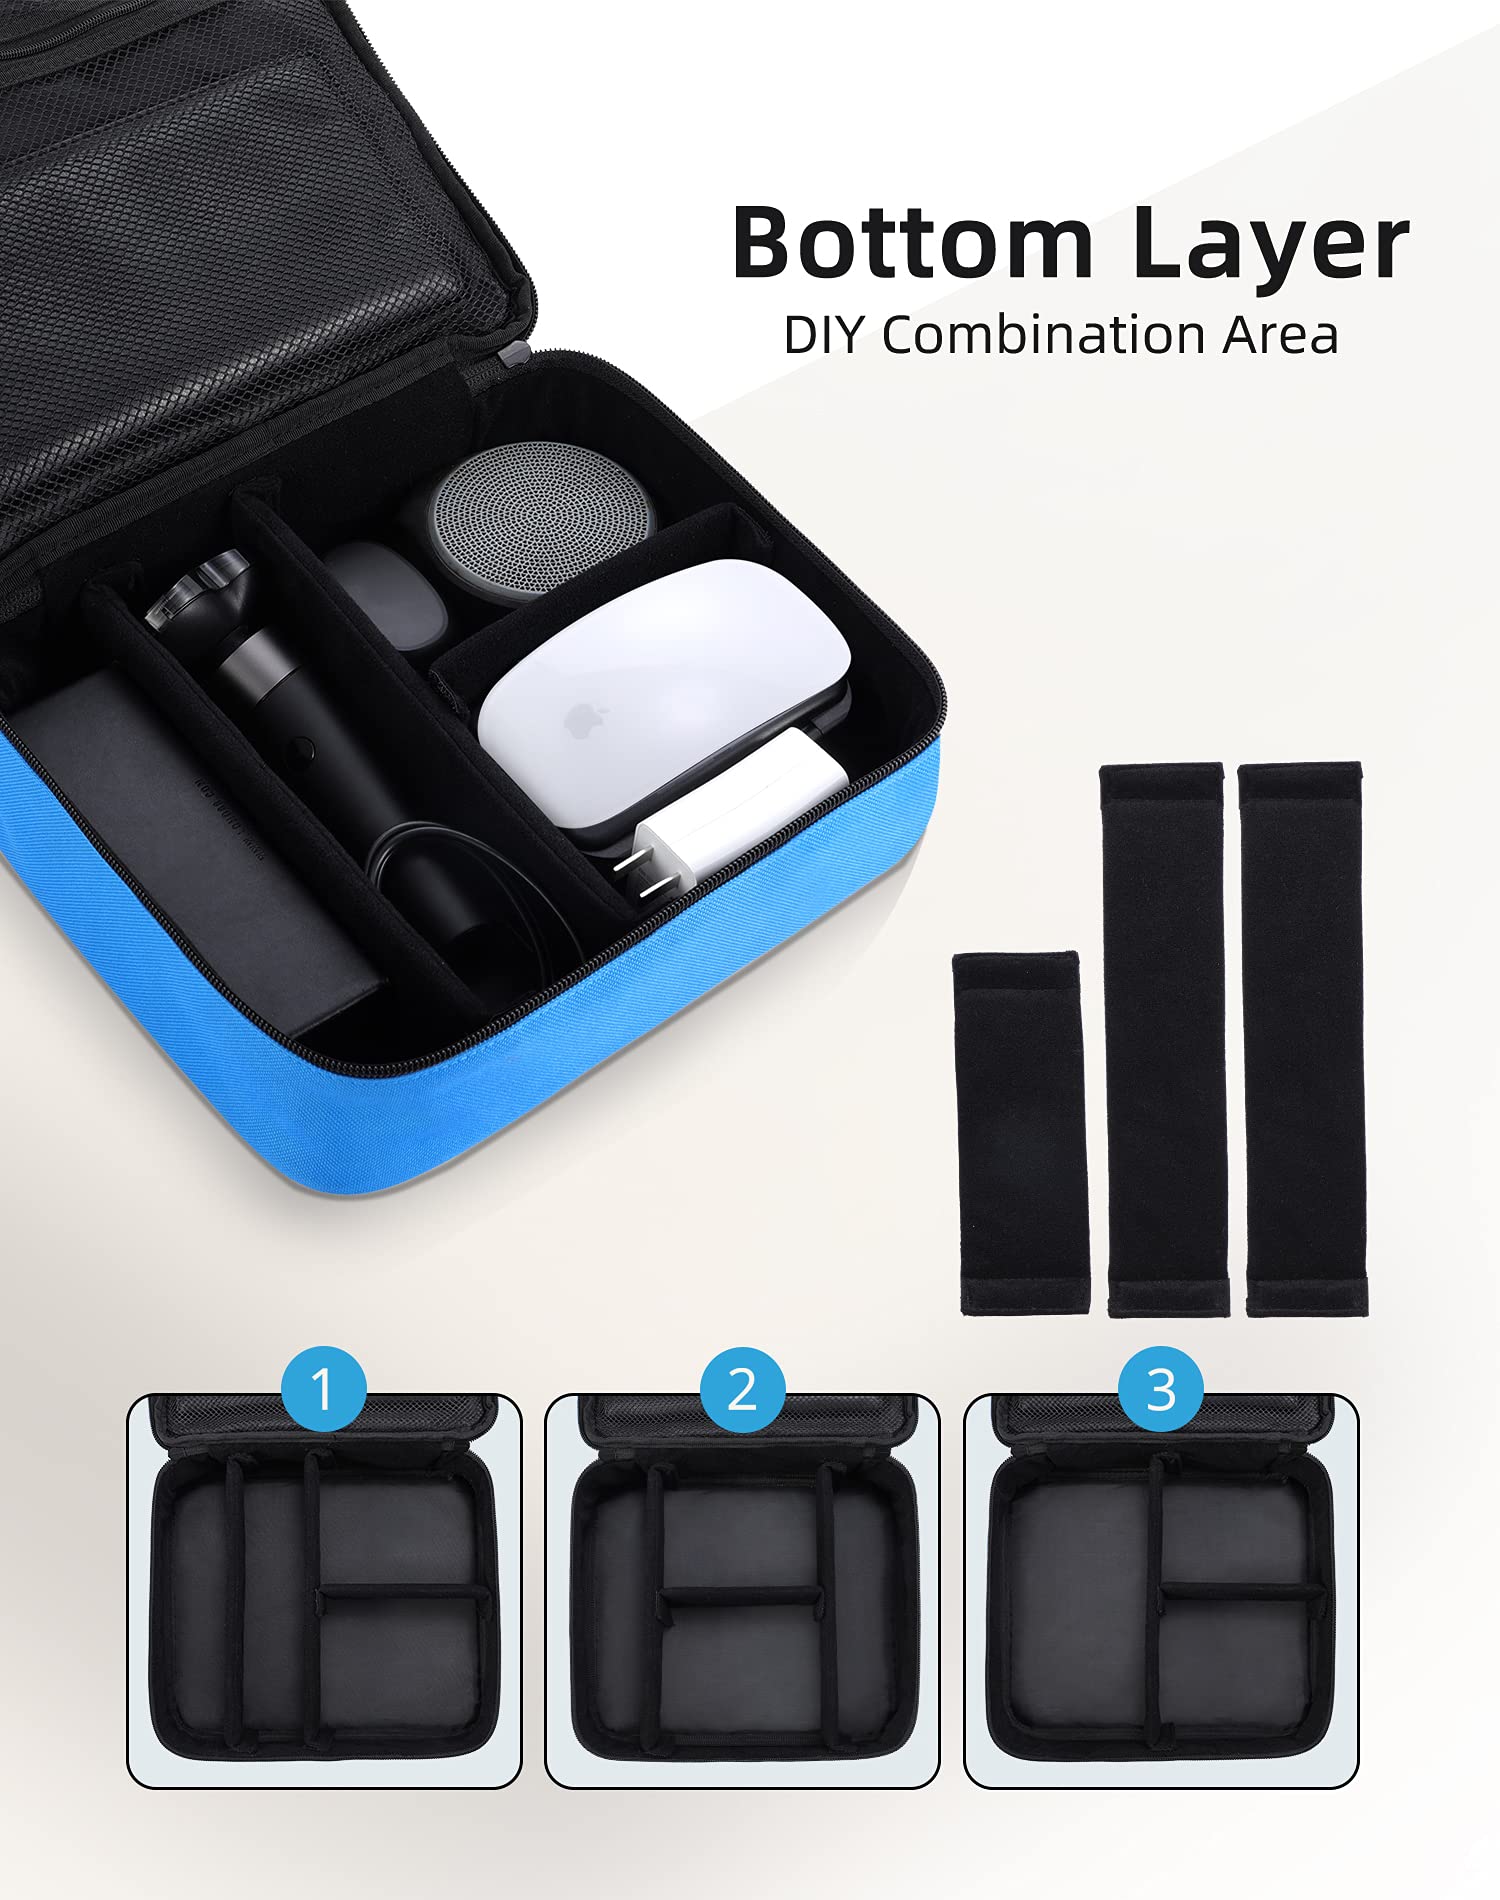 Electronics Travel Organizer-3 Layer Travel Cable Charger Storage Organizer bag with Shockproof Pokect for Tablet, Cord Organizer Case with DIY Storage Area,Tech Pounch for Electronic Accessories